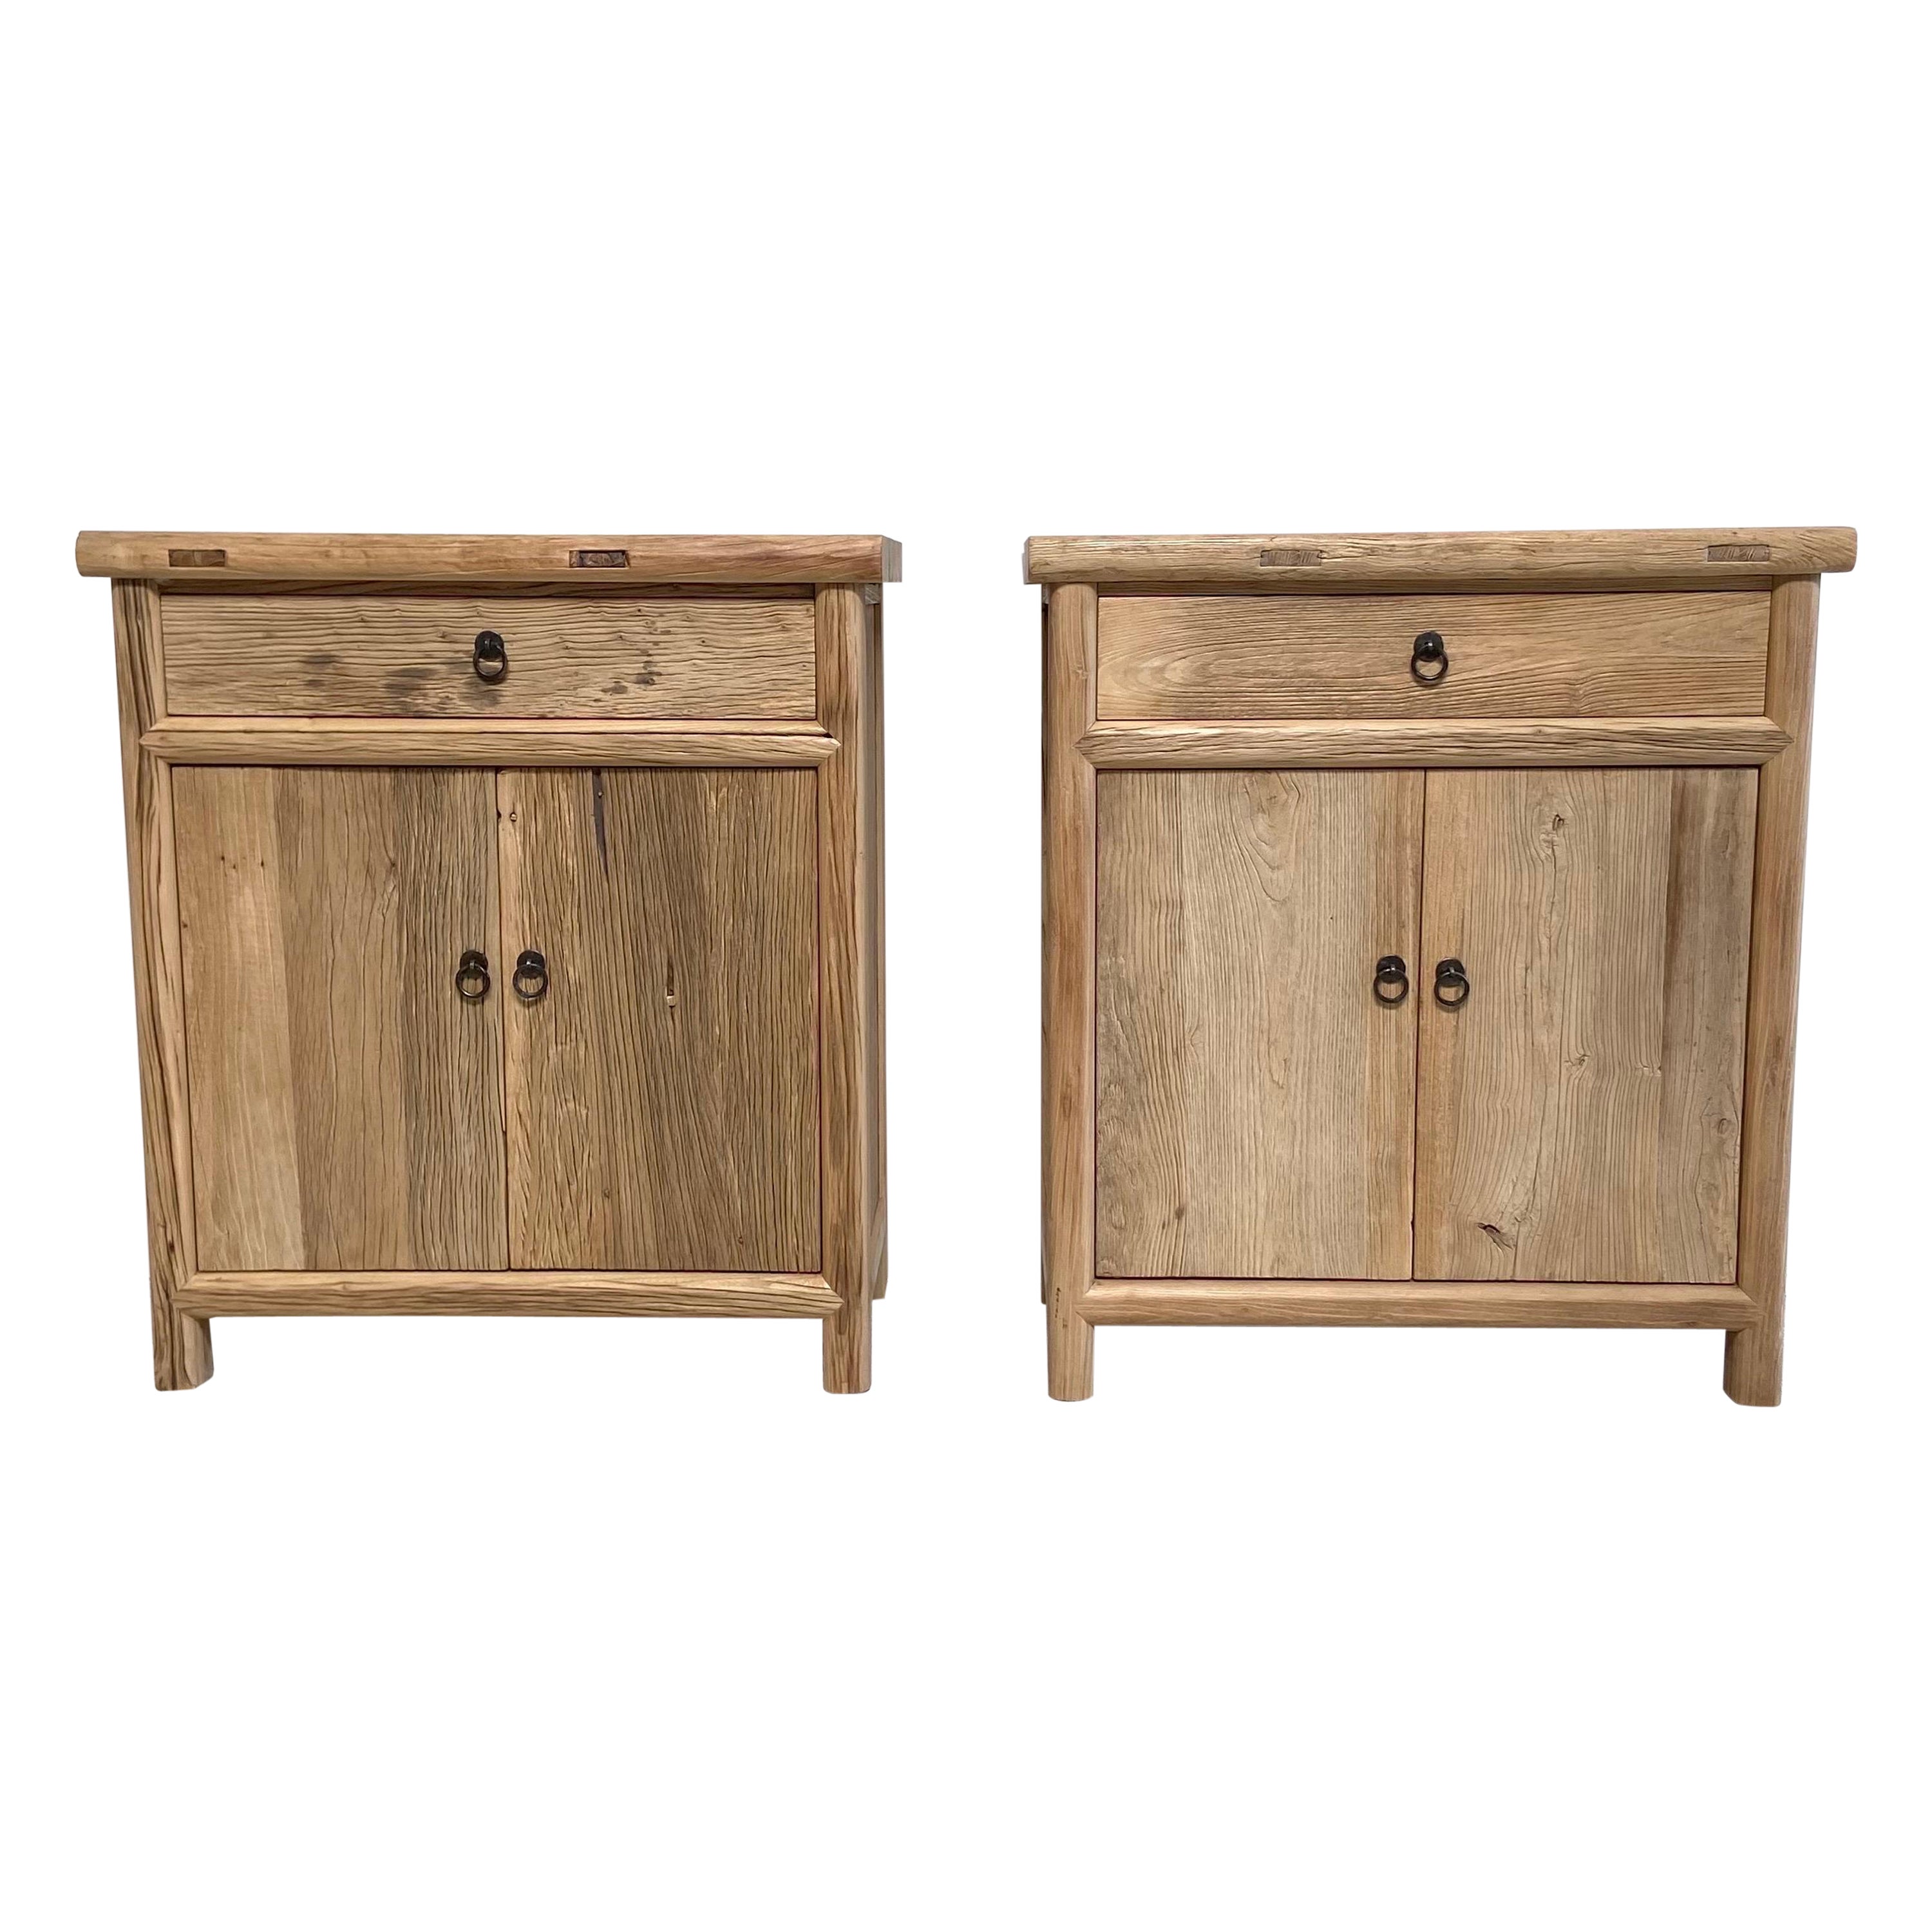 Custom Made Elm Wood Cabinet Consoles with Doors and Drawer